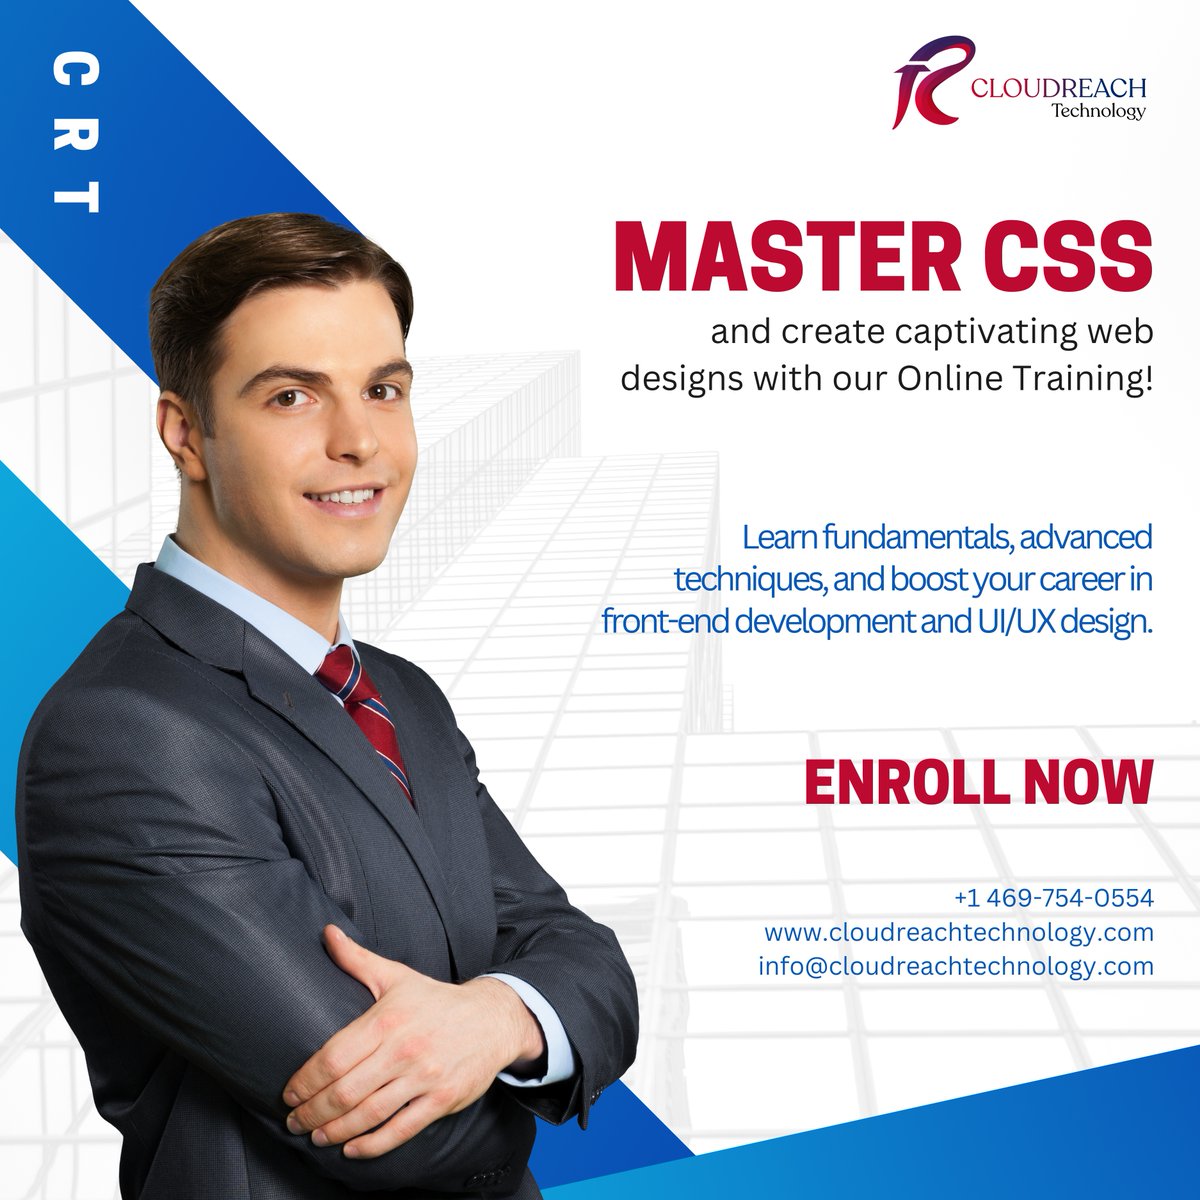 Learn to use CSS to make beautiful websites with the help of Cloudreach Technology's online courses. Come join us!

#javatraining #sastraining #businessanalyst #qualityassurance #aitraining #awstraining #aspdotnettraining #OnlineLearning #CloudreachTechnology #training